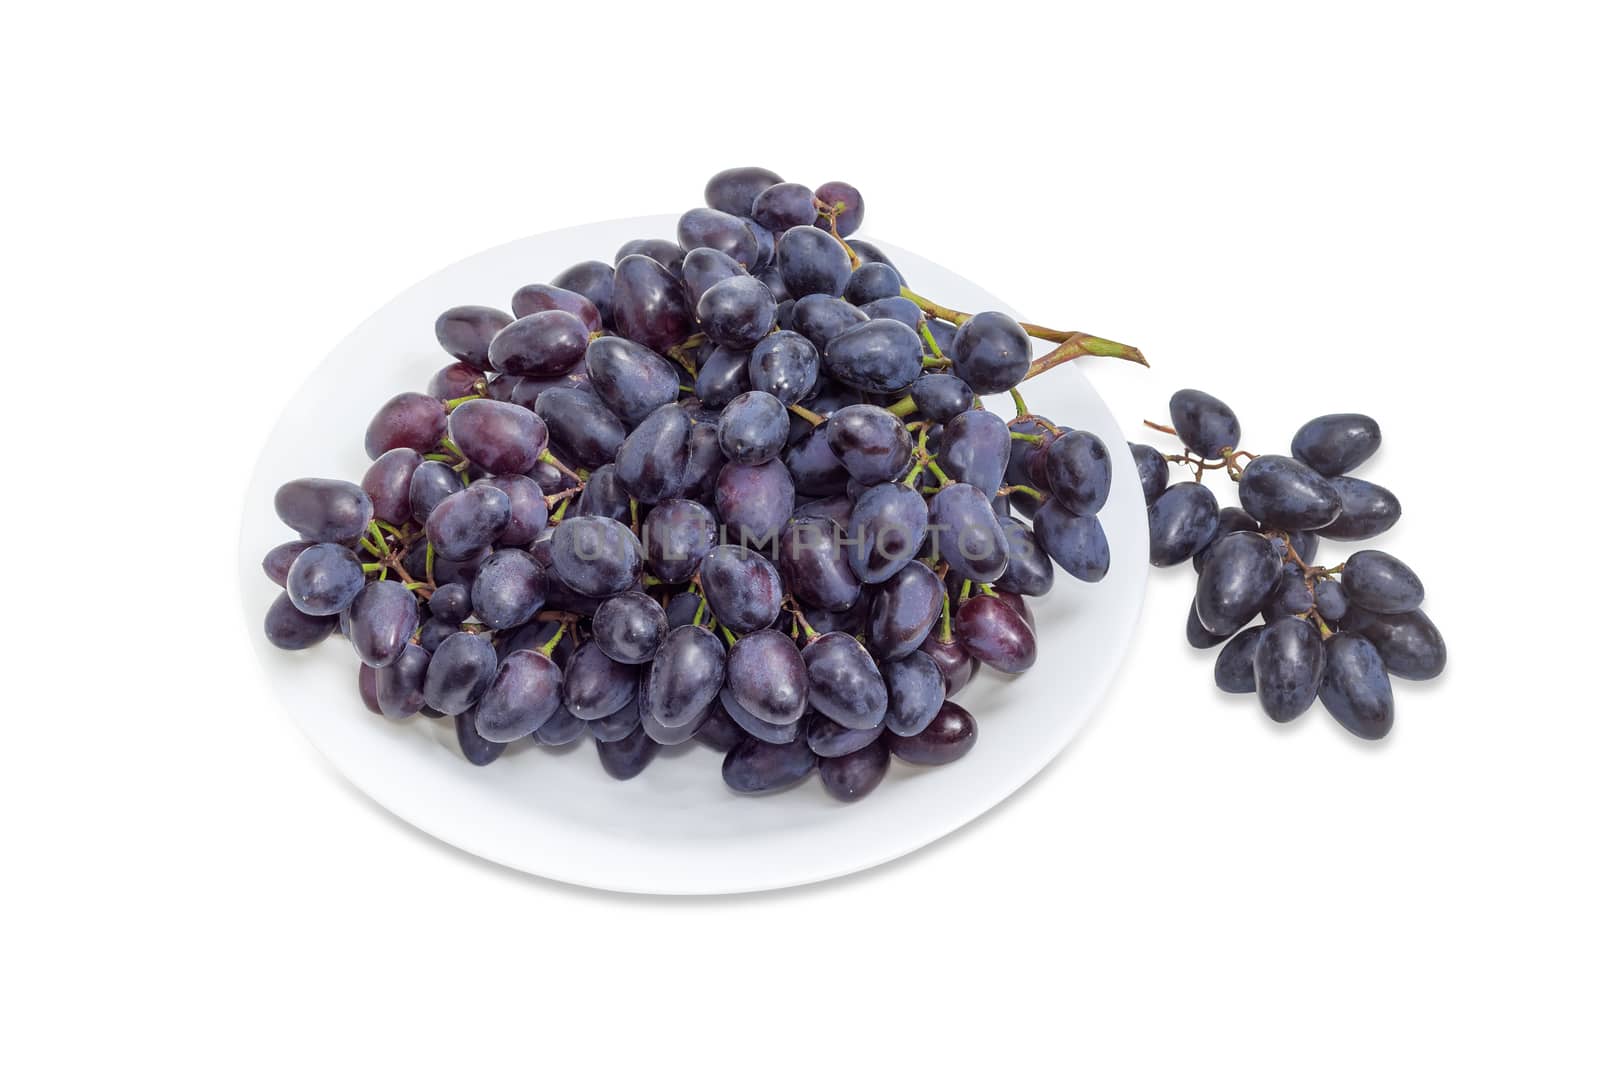 Big cluster of the ripe dark blue table grapes on a white dish and small grape cluster beside on a white background
